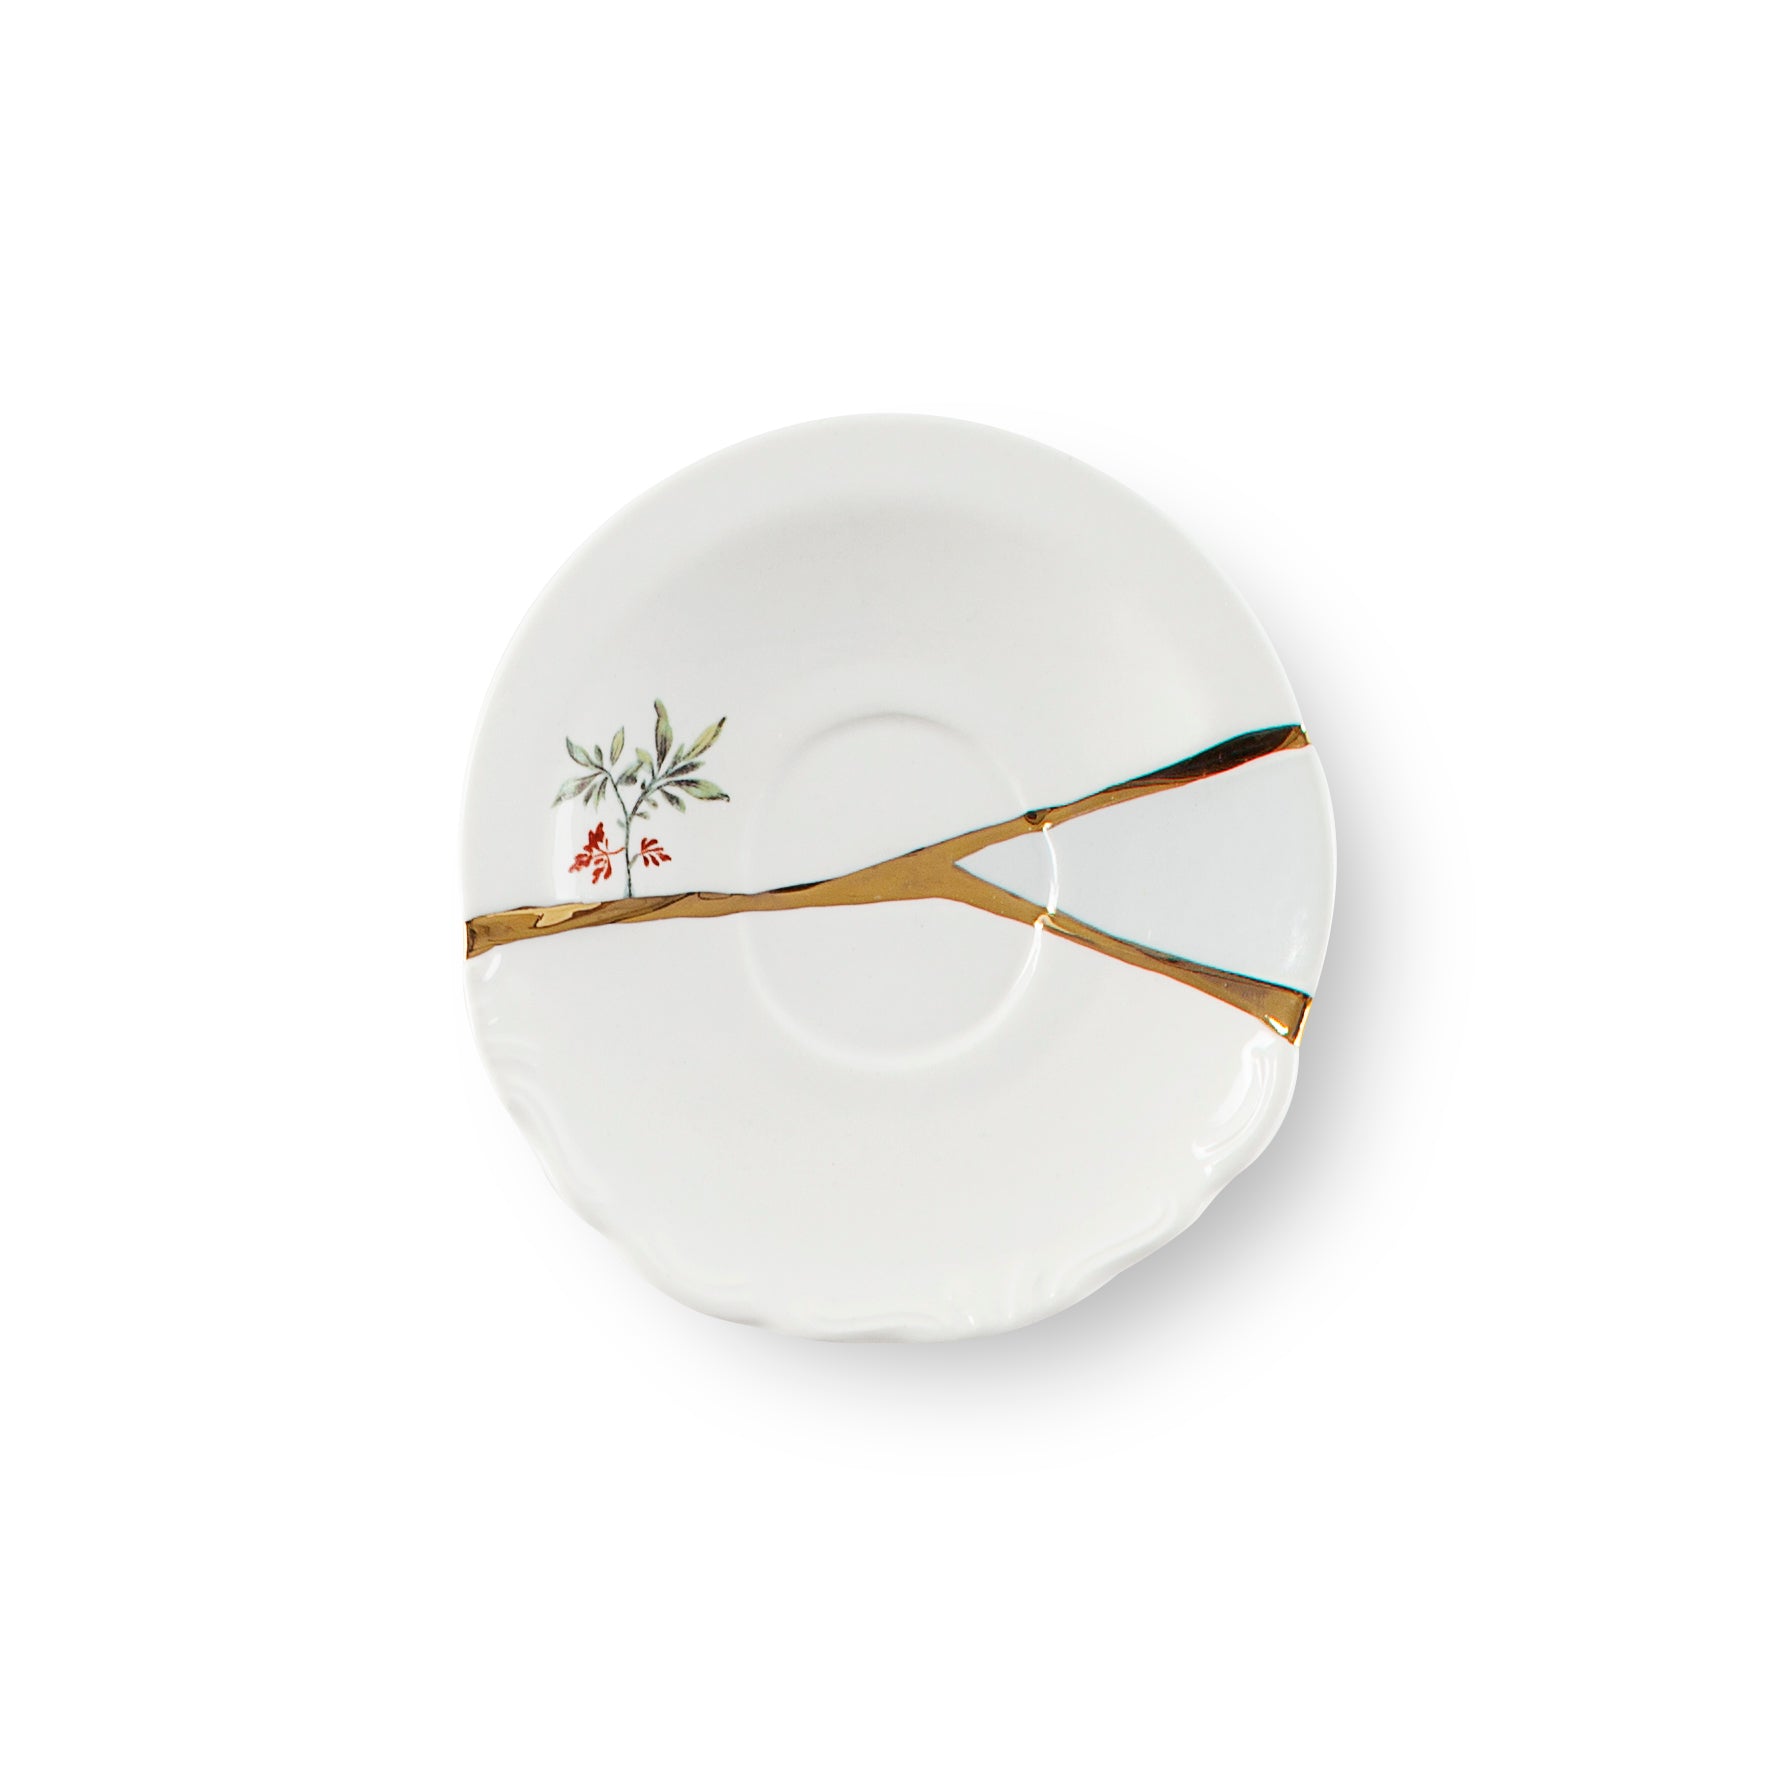 Seletti Kintsugi n°3 Coffee cup and saucer in porcelain